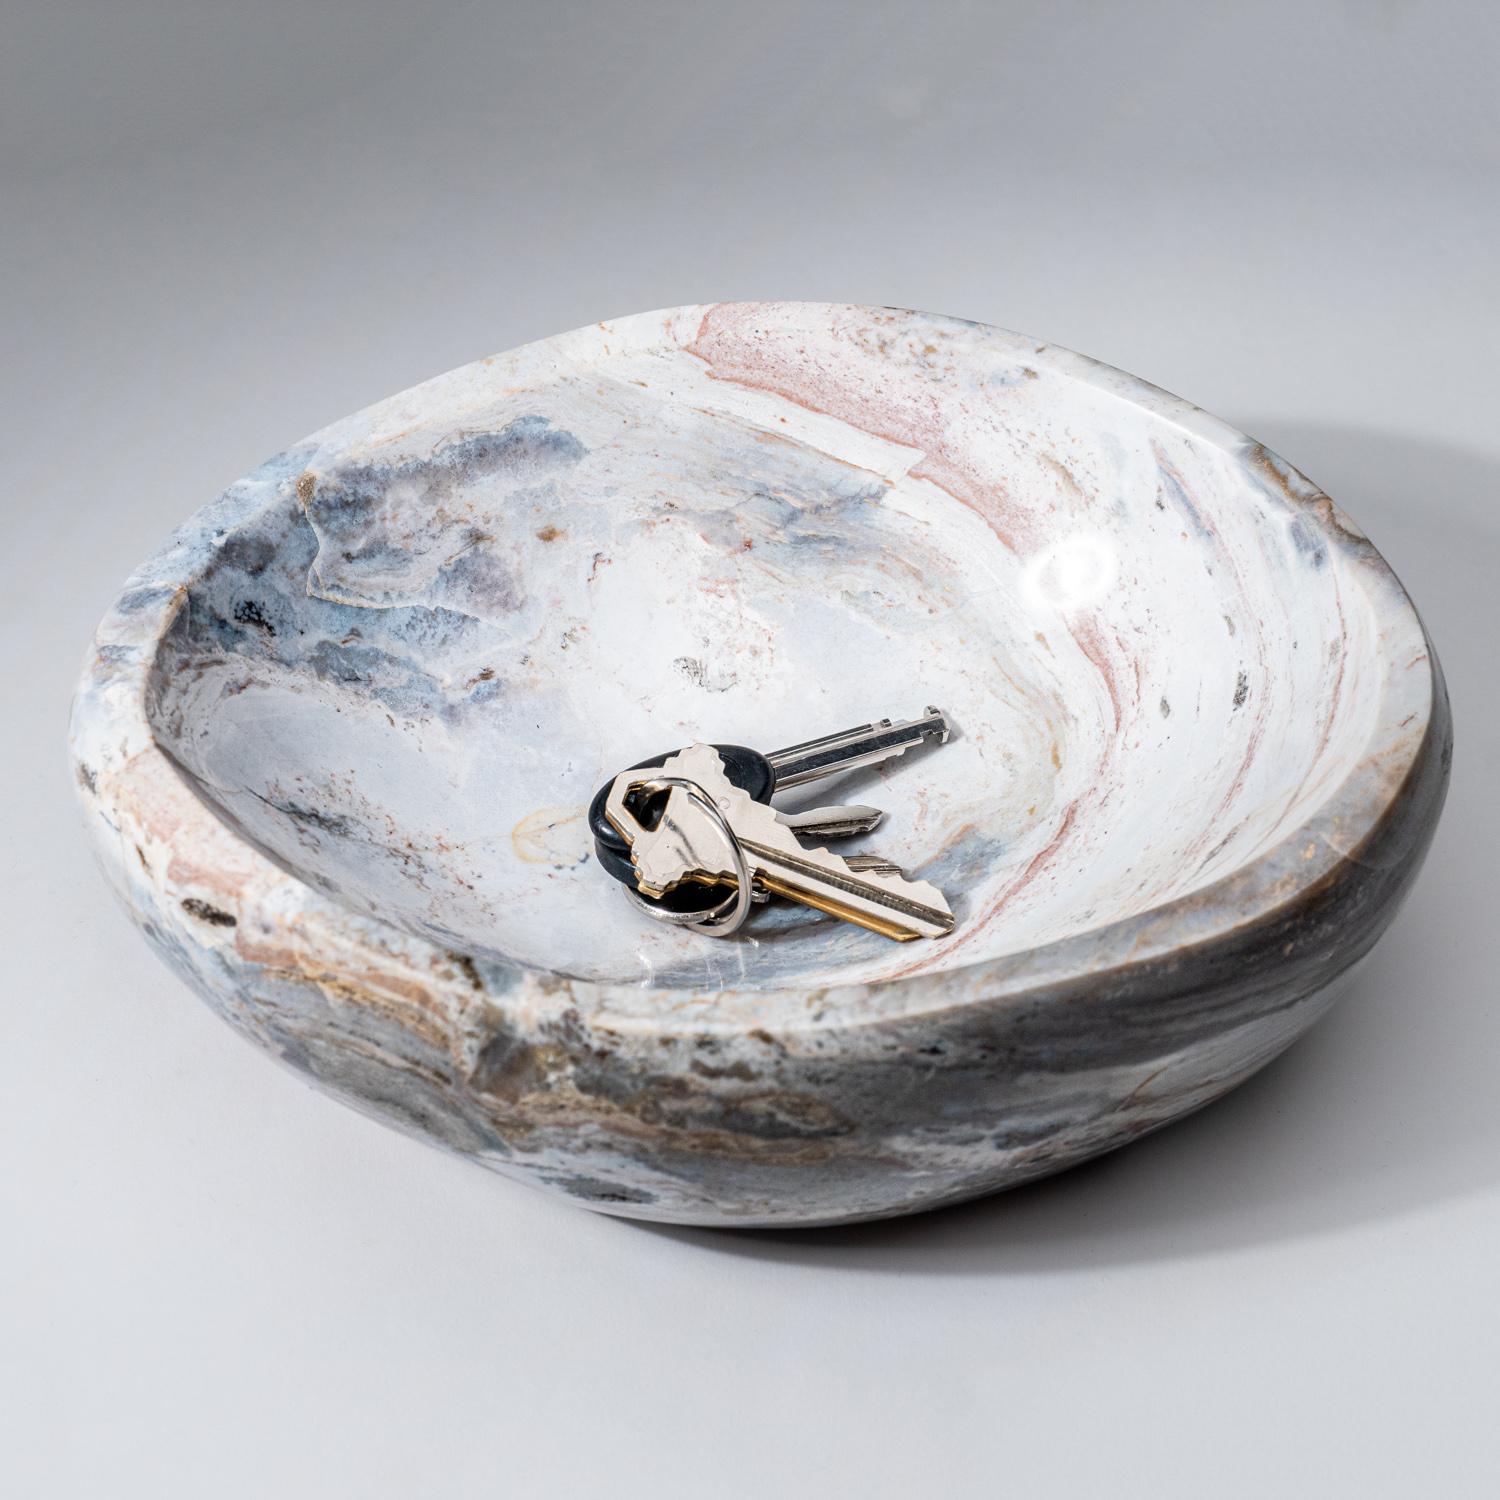 Beautiful one-of-a-kind, free-form ocean jasper bowl from Madagascar. This will make a beautiful centerpiece to complement your home and it's polished to a mirror finish. Ocean Jasper is considered highly restorative for tissue deterioration of the